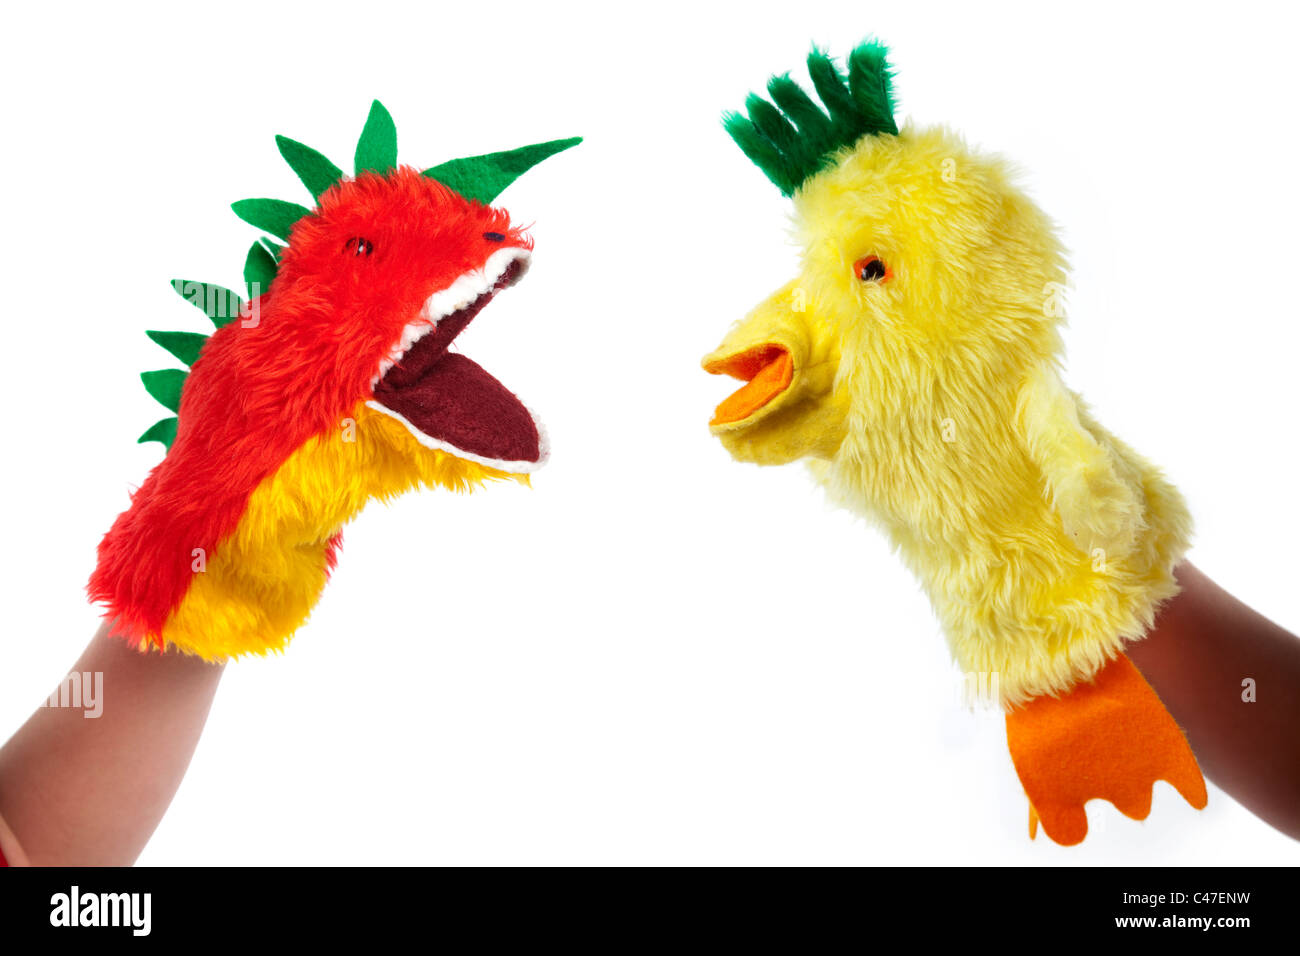 Crazy chick and lizard hand puppets Stock Photo